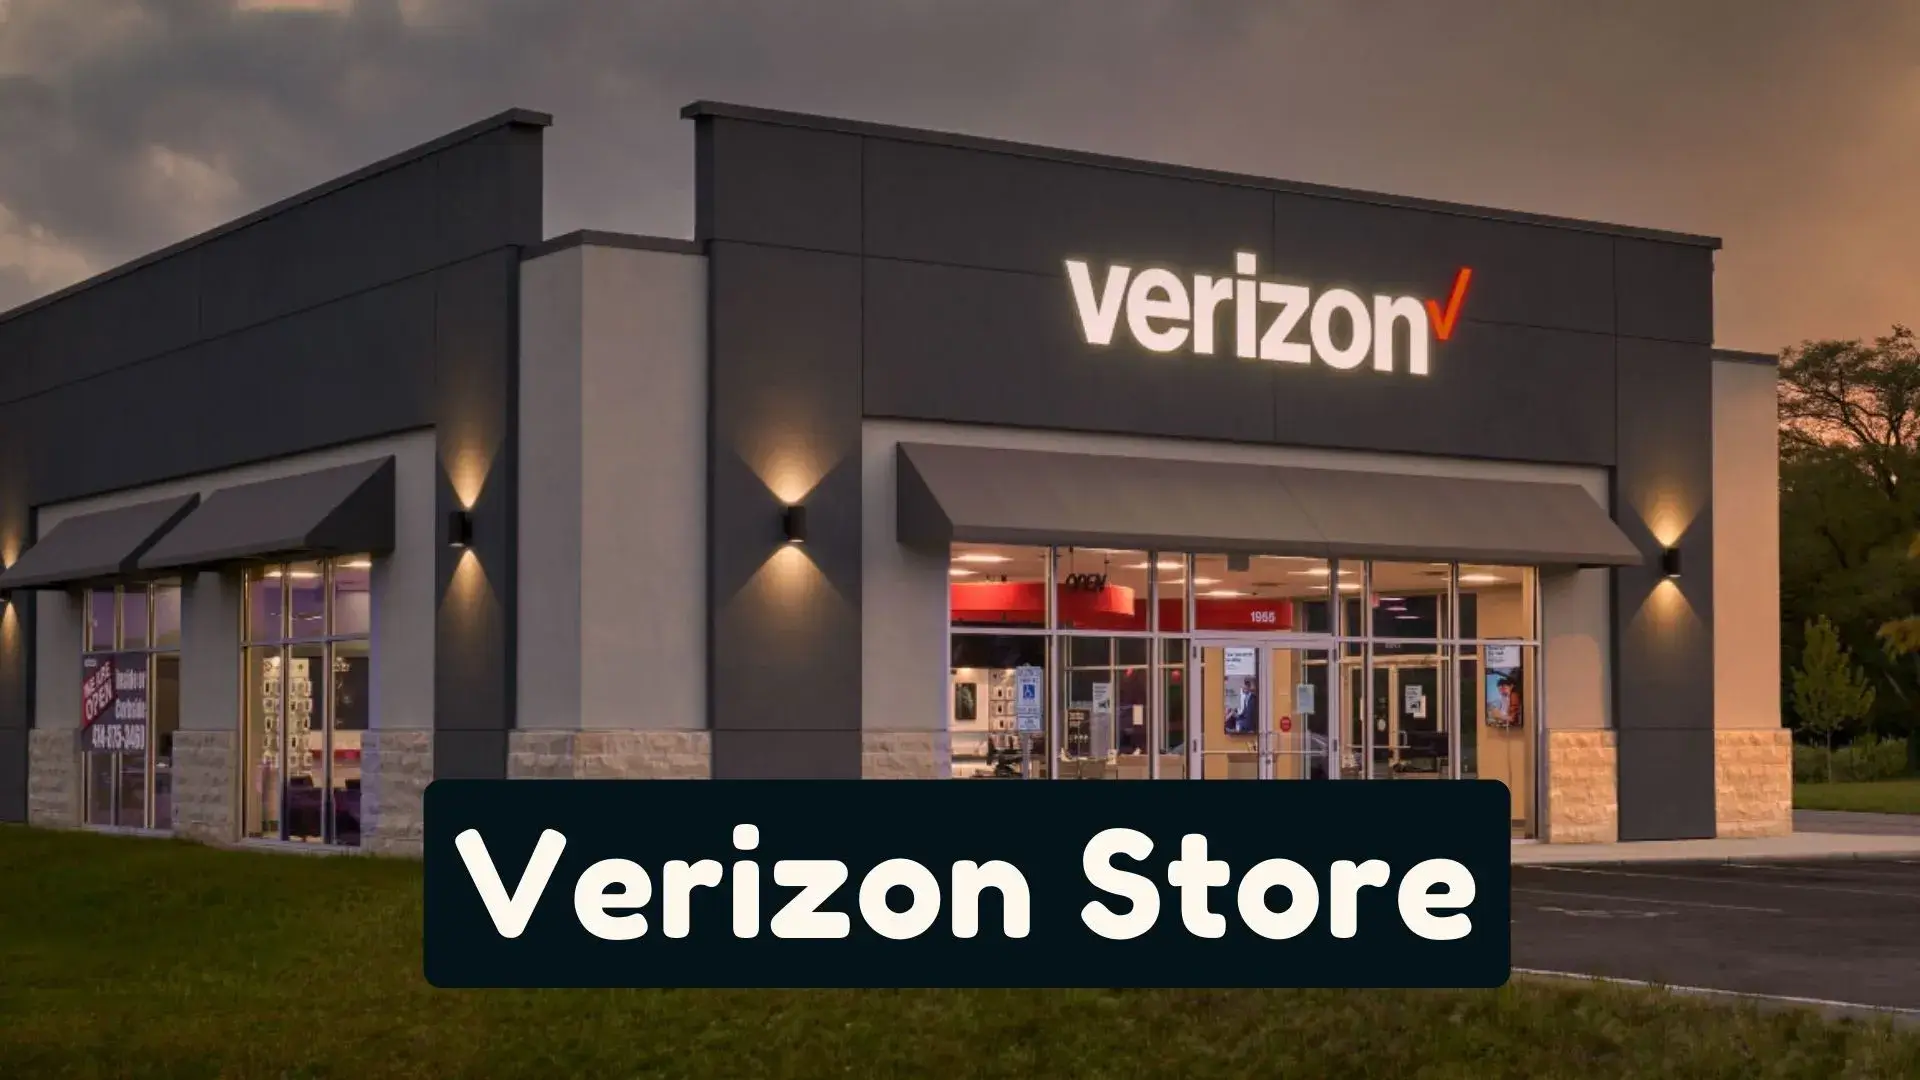 Discover Verizon store hours for all your tech needs. Check out our convenient hours for expert assistance and services near you.